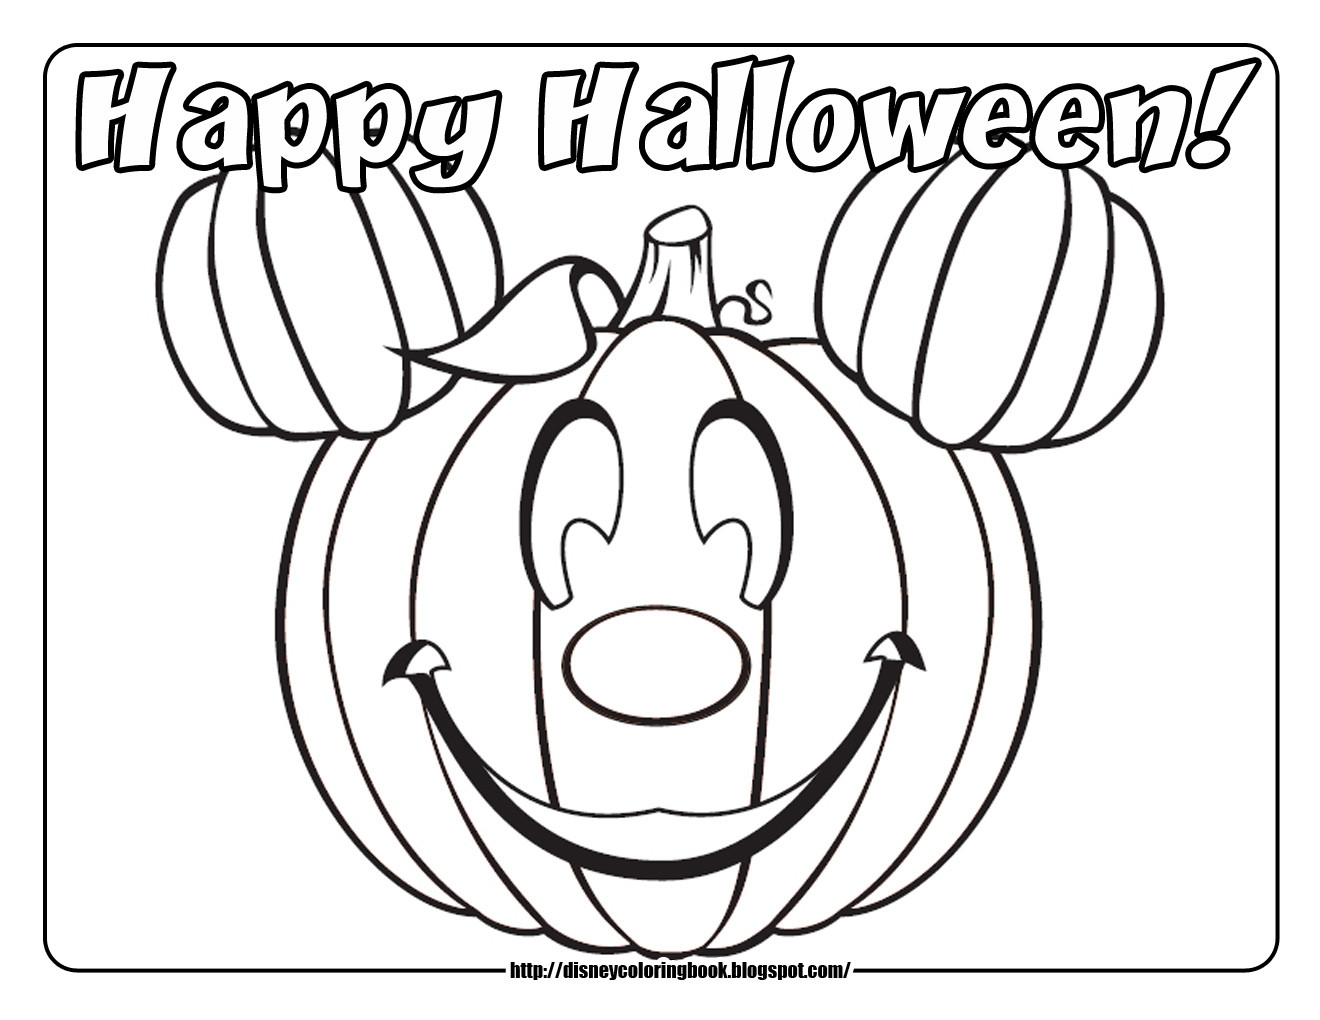 Free Printable Halloween Coloring Pages
 Disney Coloring Pages and Sheets for Kids